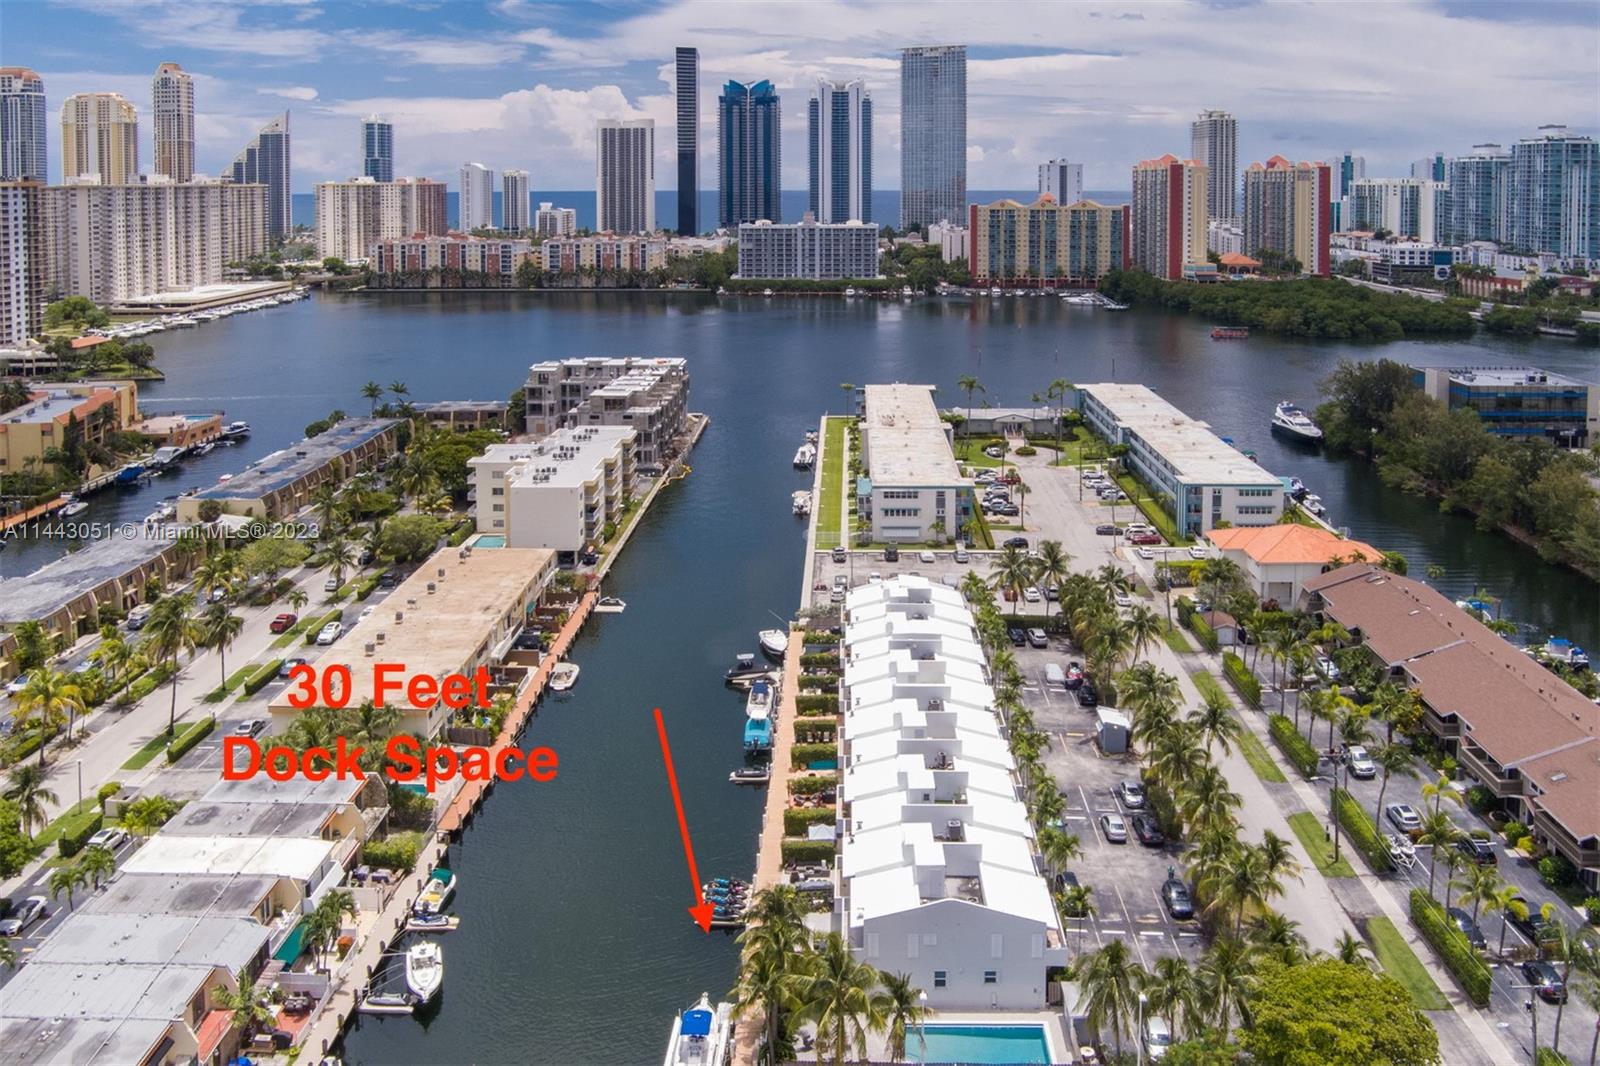 Property for Sale at 3807 Ne 166th St - 30 Ft Dock St 2, North Miami Beach, Miami-Dade County, Florida - Bedrooms: 3 
Bathrooms: 3  - $740,000